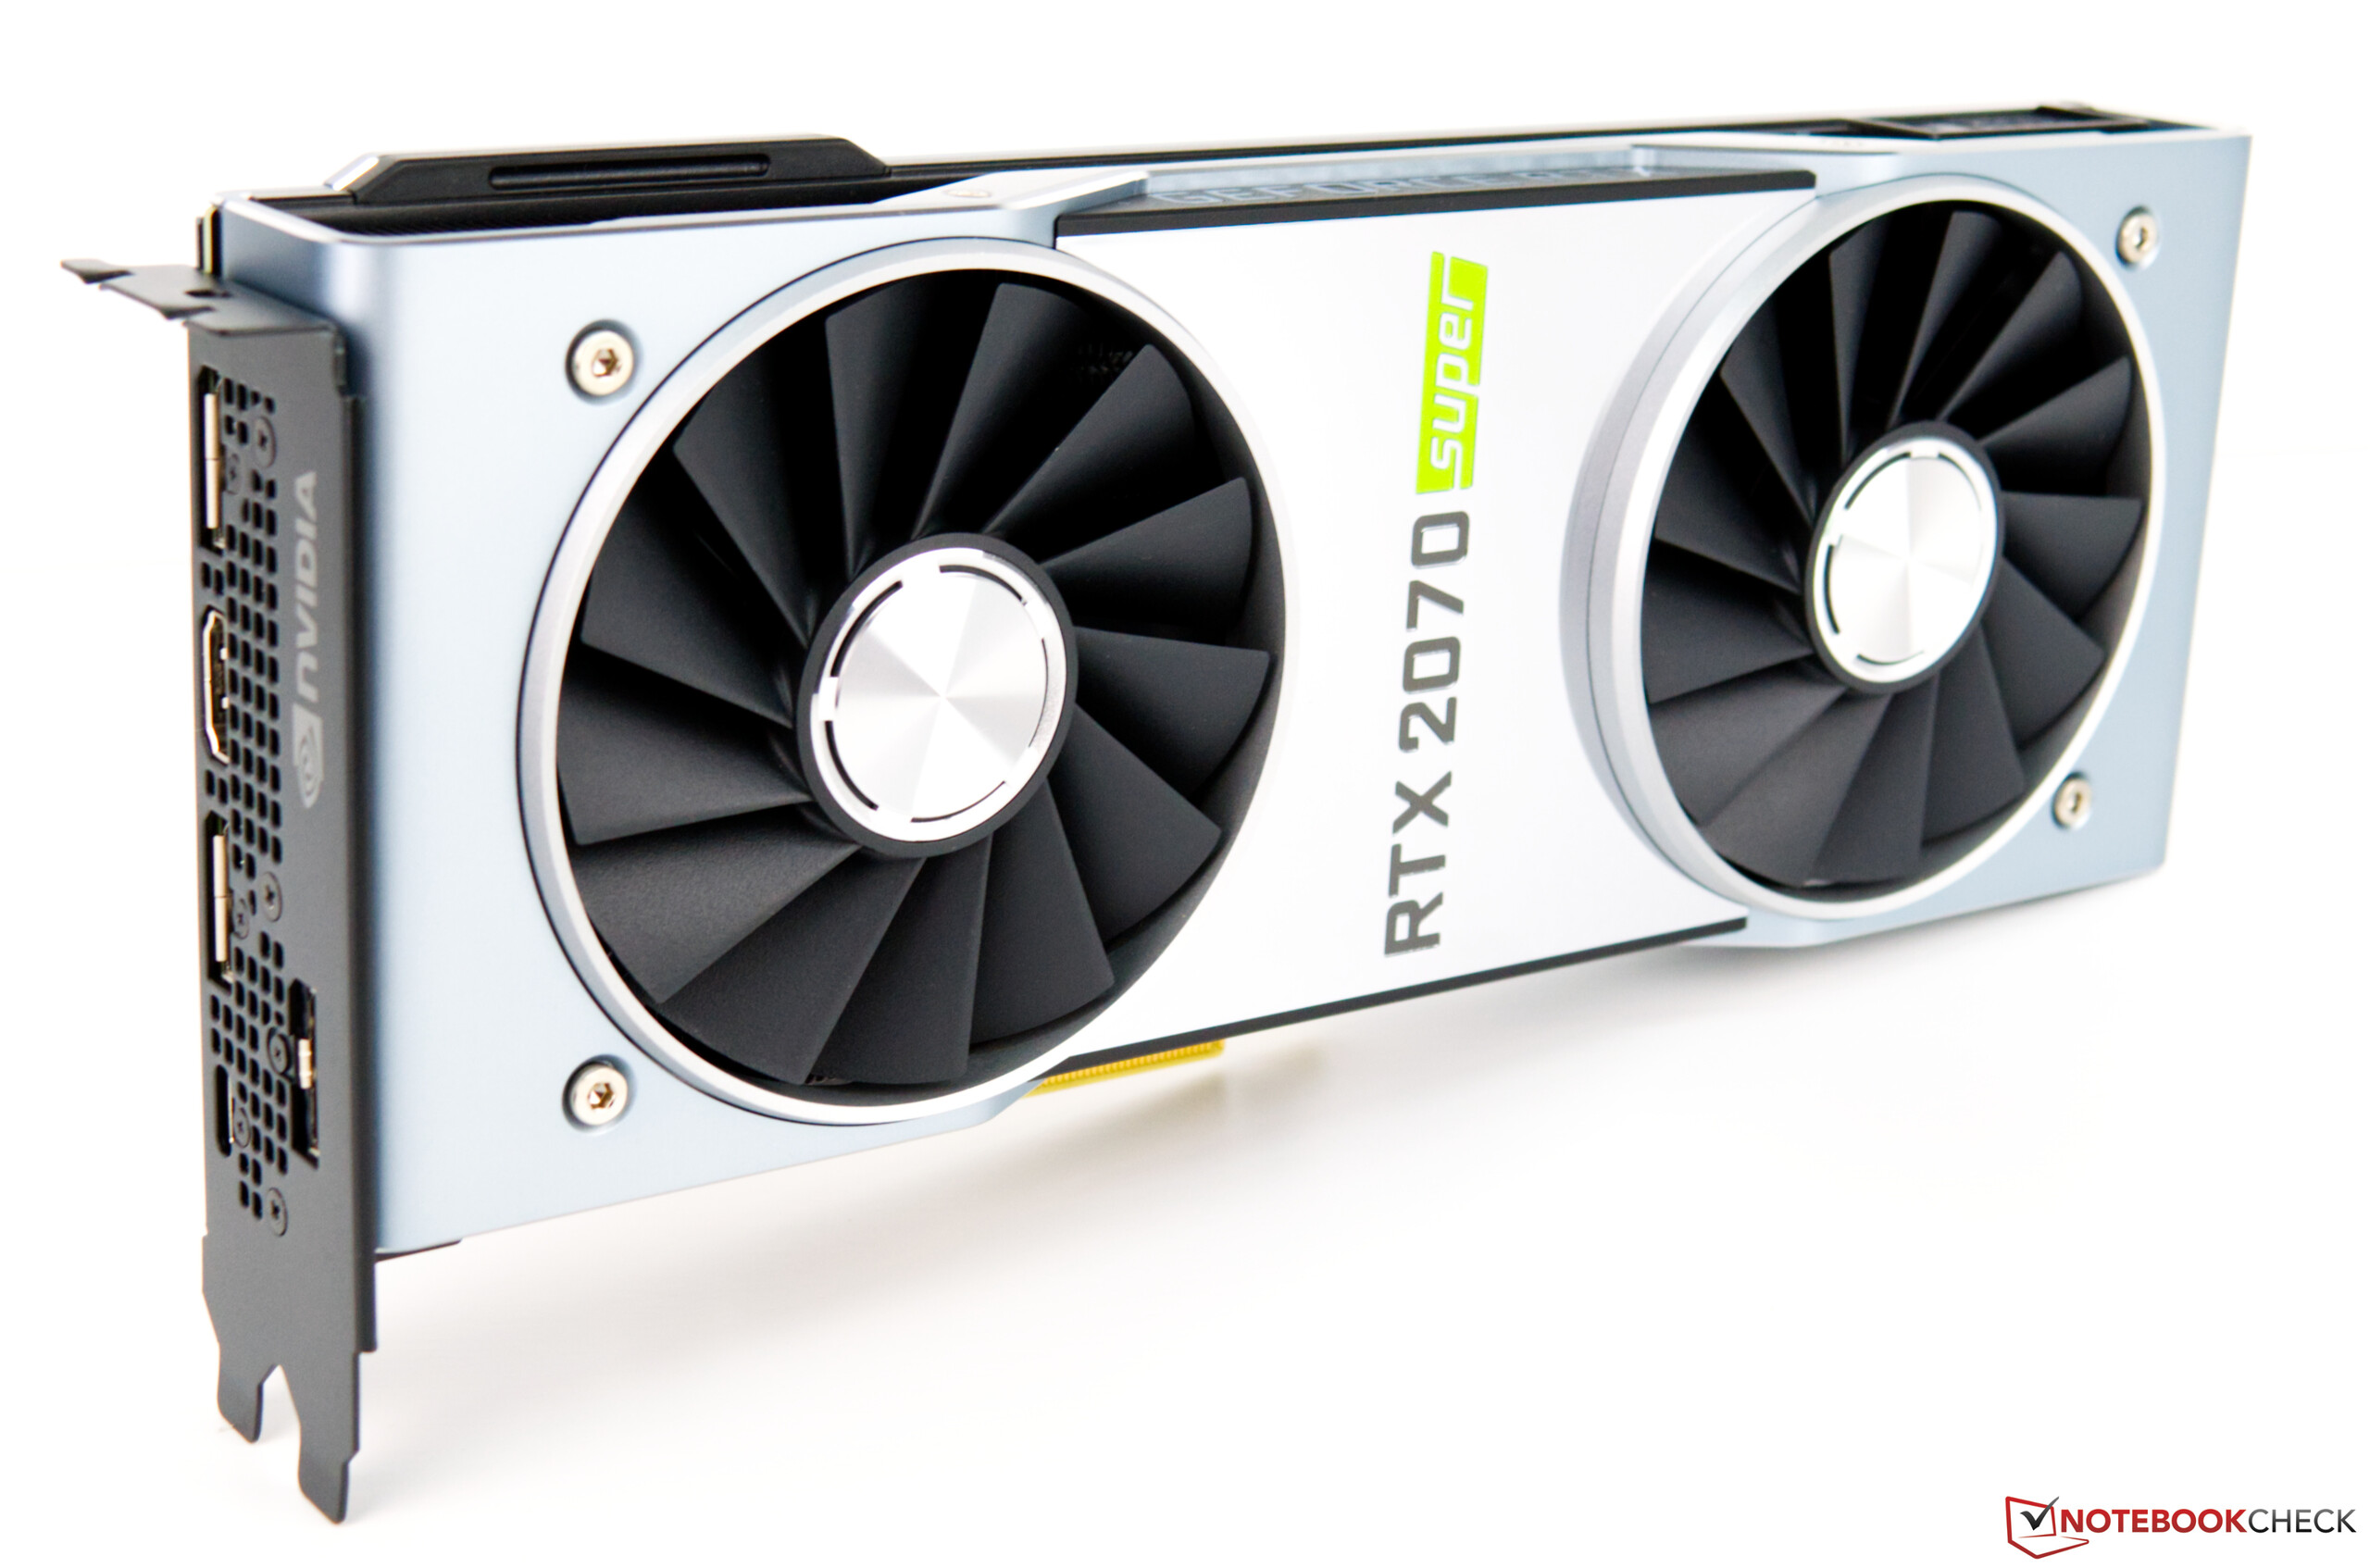 silencio Asesino hacerte molestar NVIDIA GeForce RTX 2070 SUPER Desktop GPU Review: In touching distance of  the GeForce RTX 2080 - NotebookCheck.net Reviews